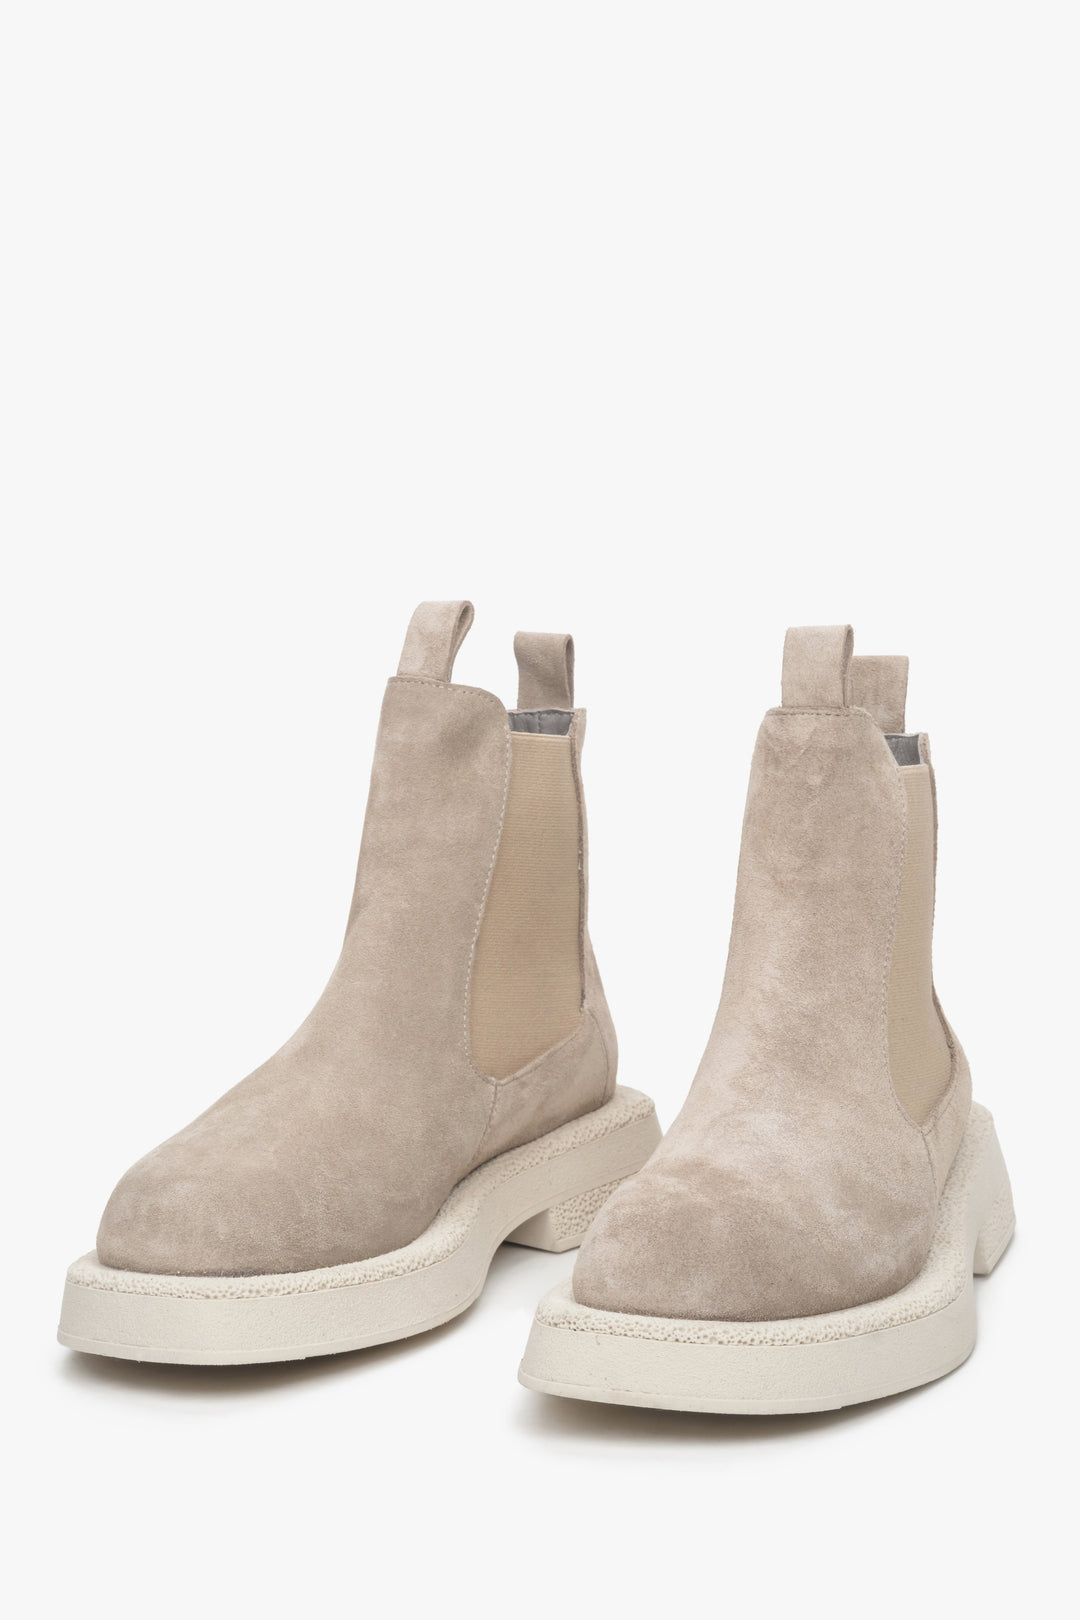 Women's beige Chelsea boots made of genuine suede - a close-up on tip of the shoe.